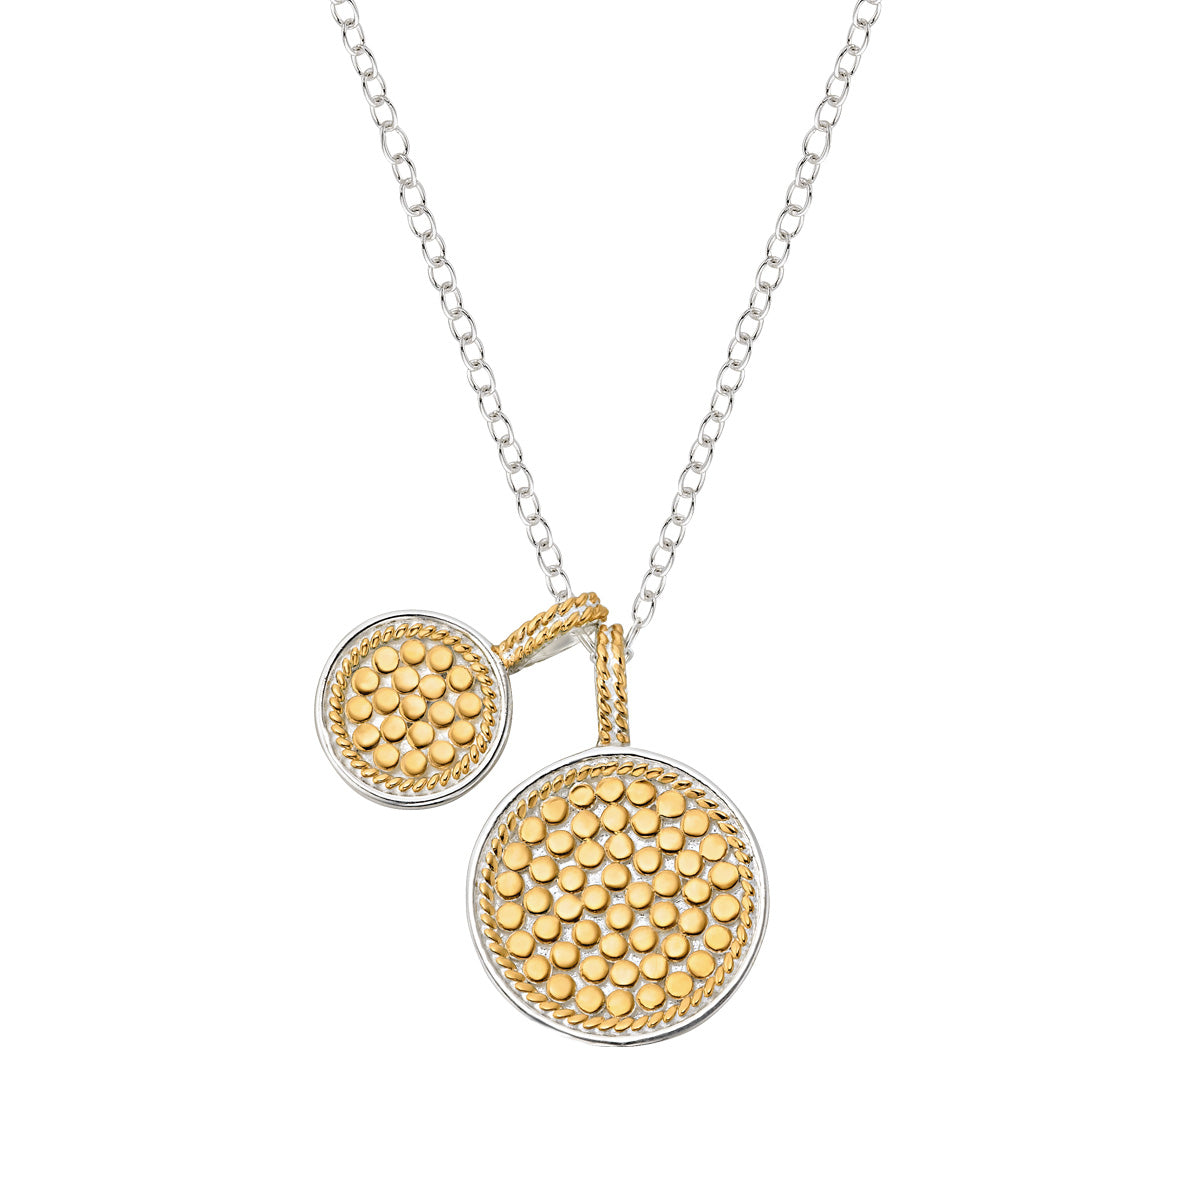 Ana Beck 18kt gold plated and sterling silver Two-Tone Double Disk Charm Necklace